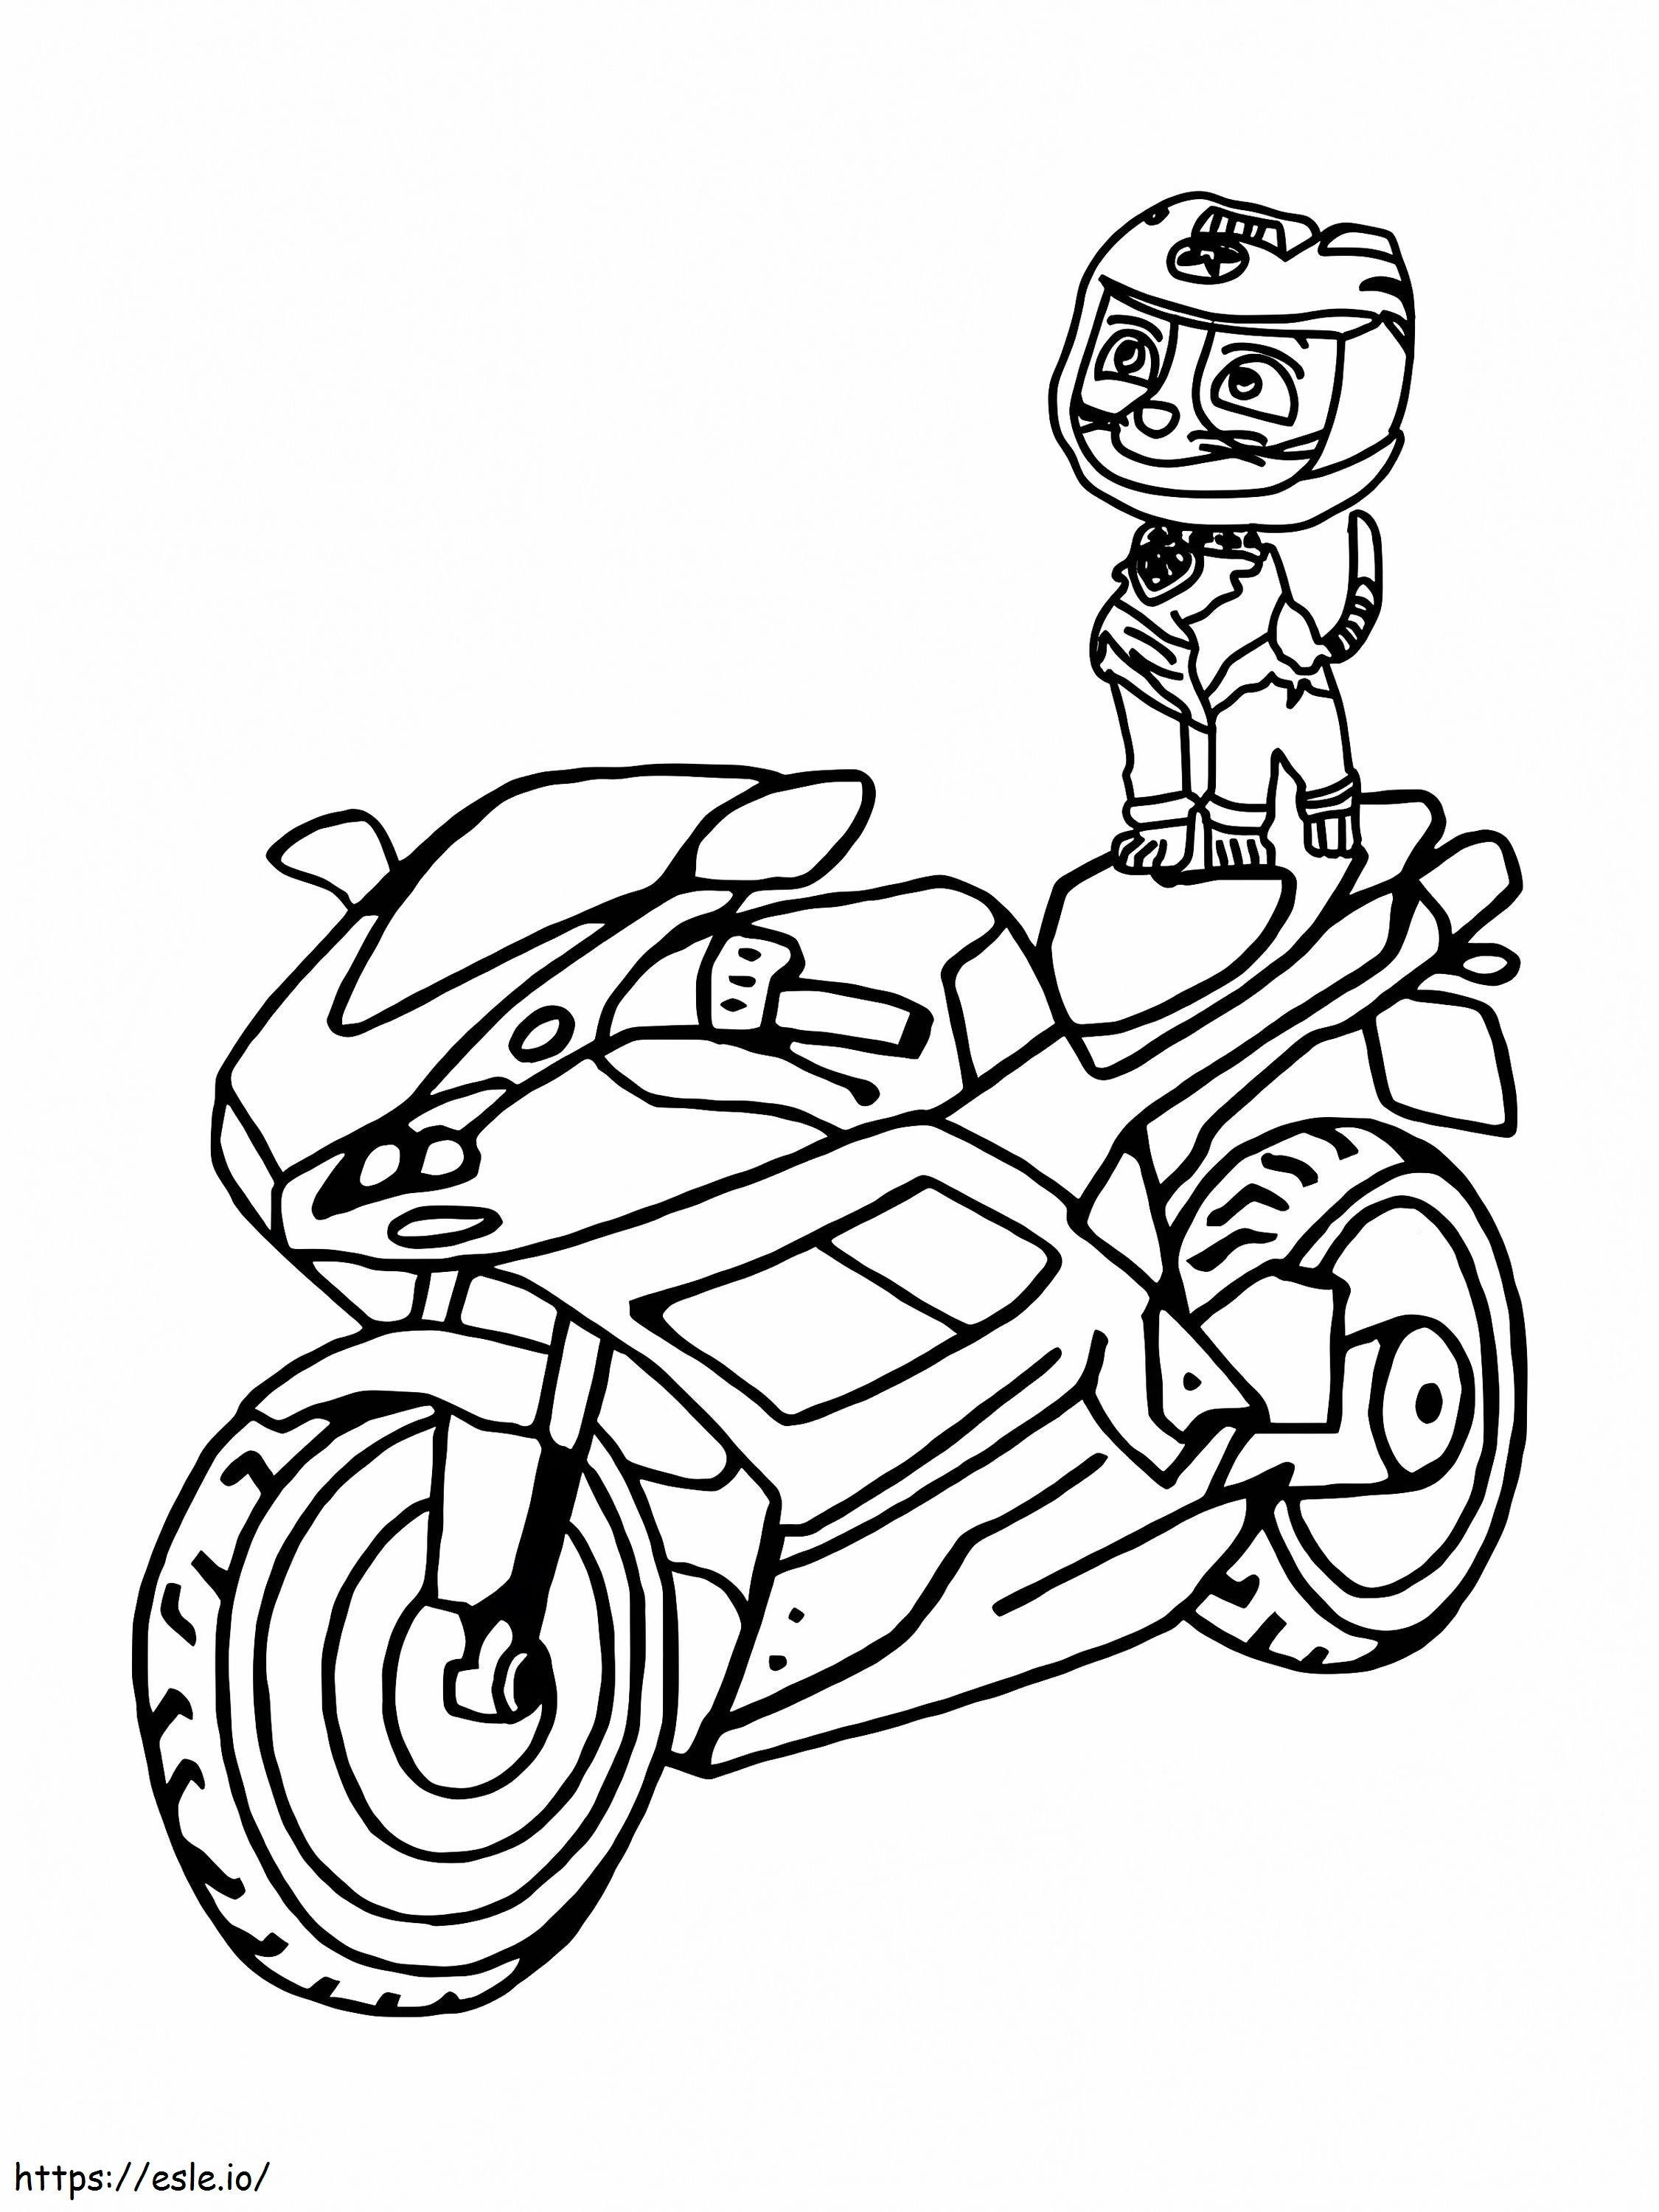 Awesome Bike And Wild Cat coloring page